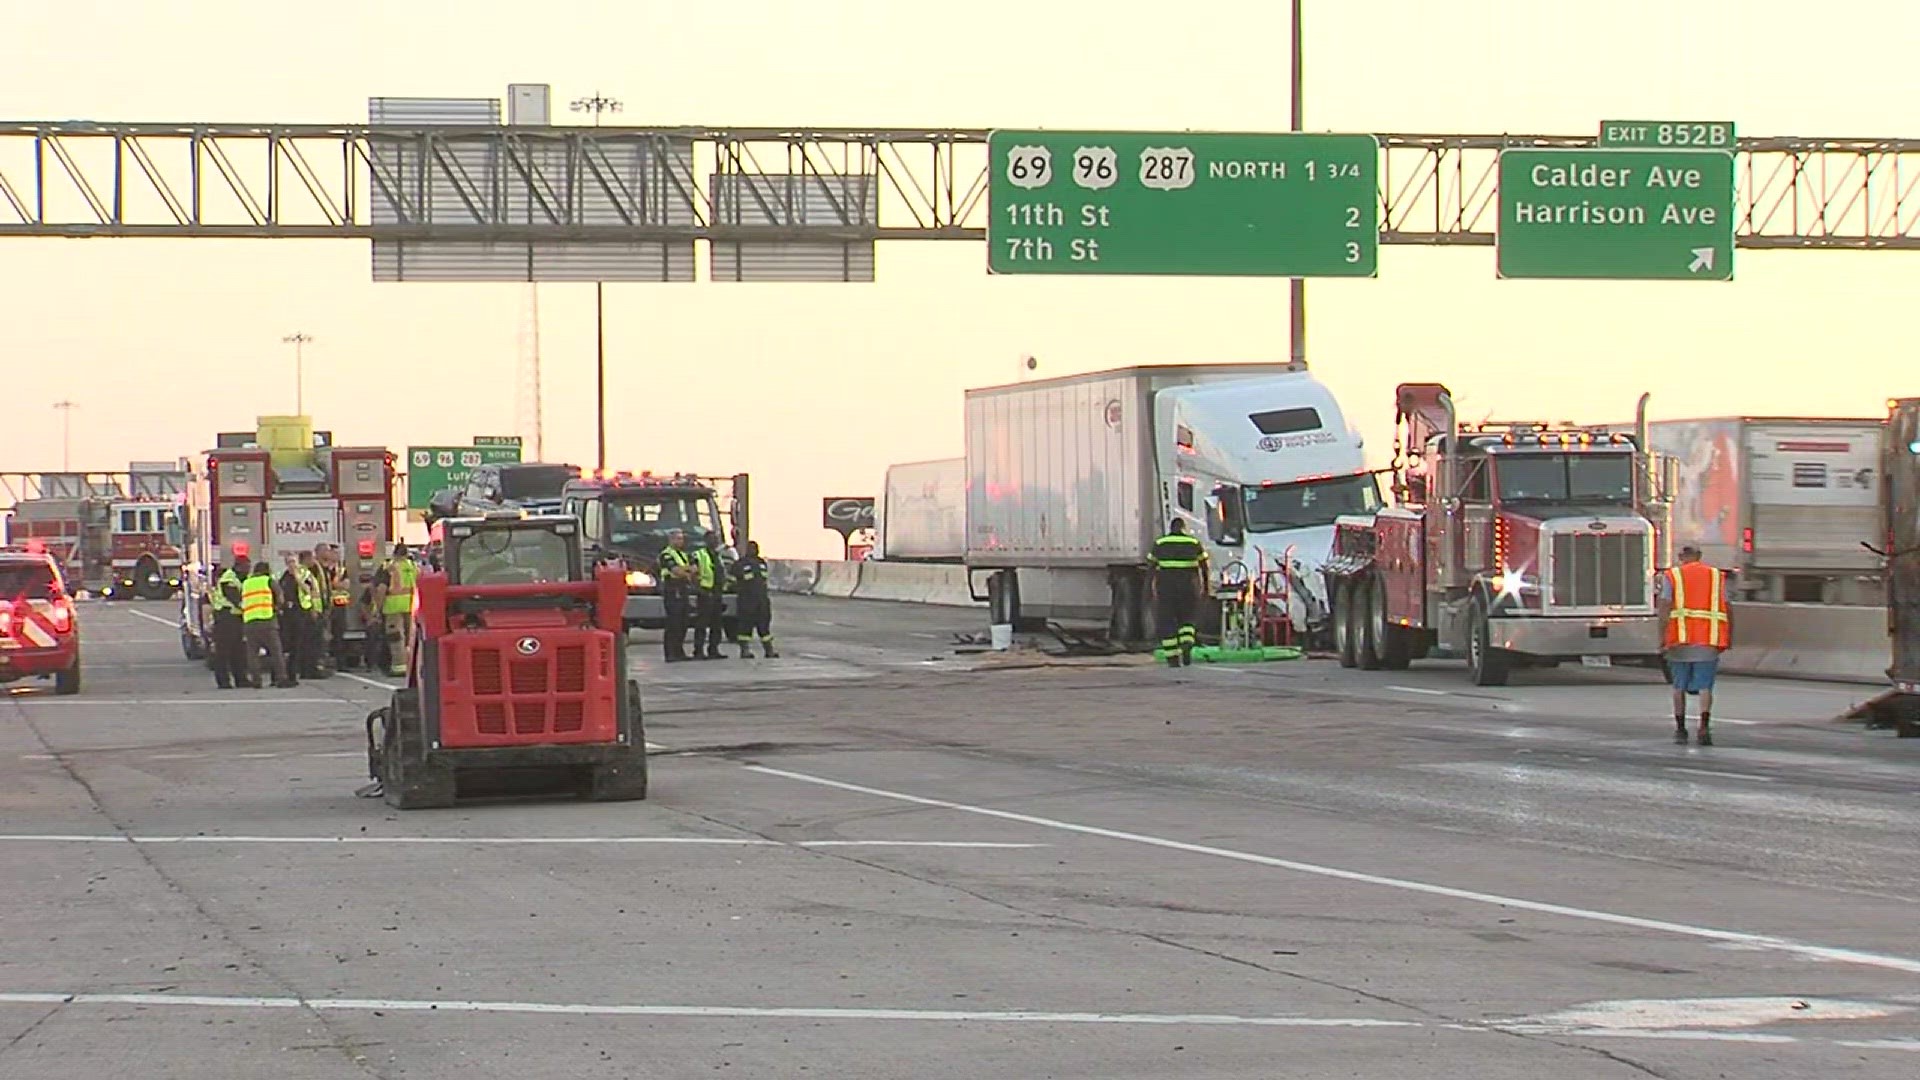 The southbound lanes of Interstate 10 in Beaumont were shut down for about three hours to clean up the wreck. Only minor inquires were reported.